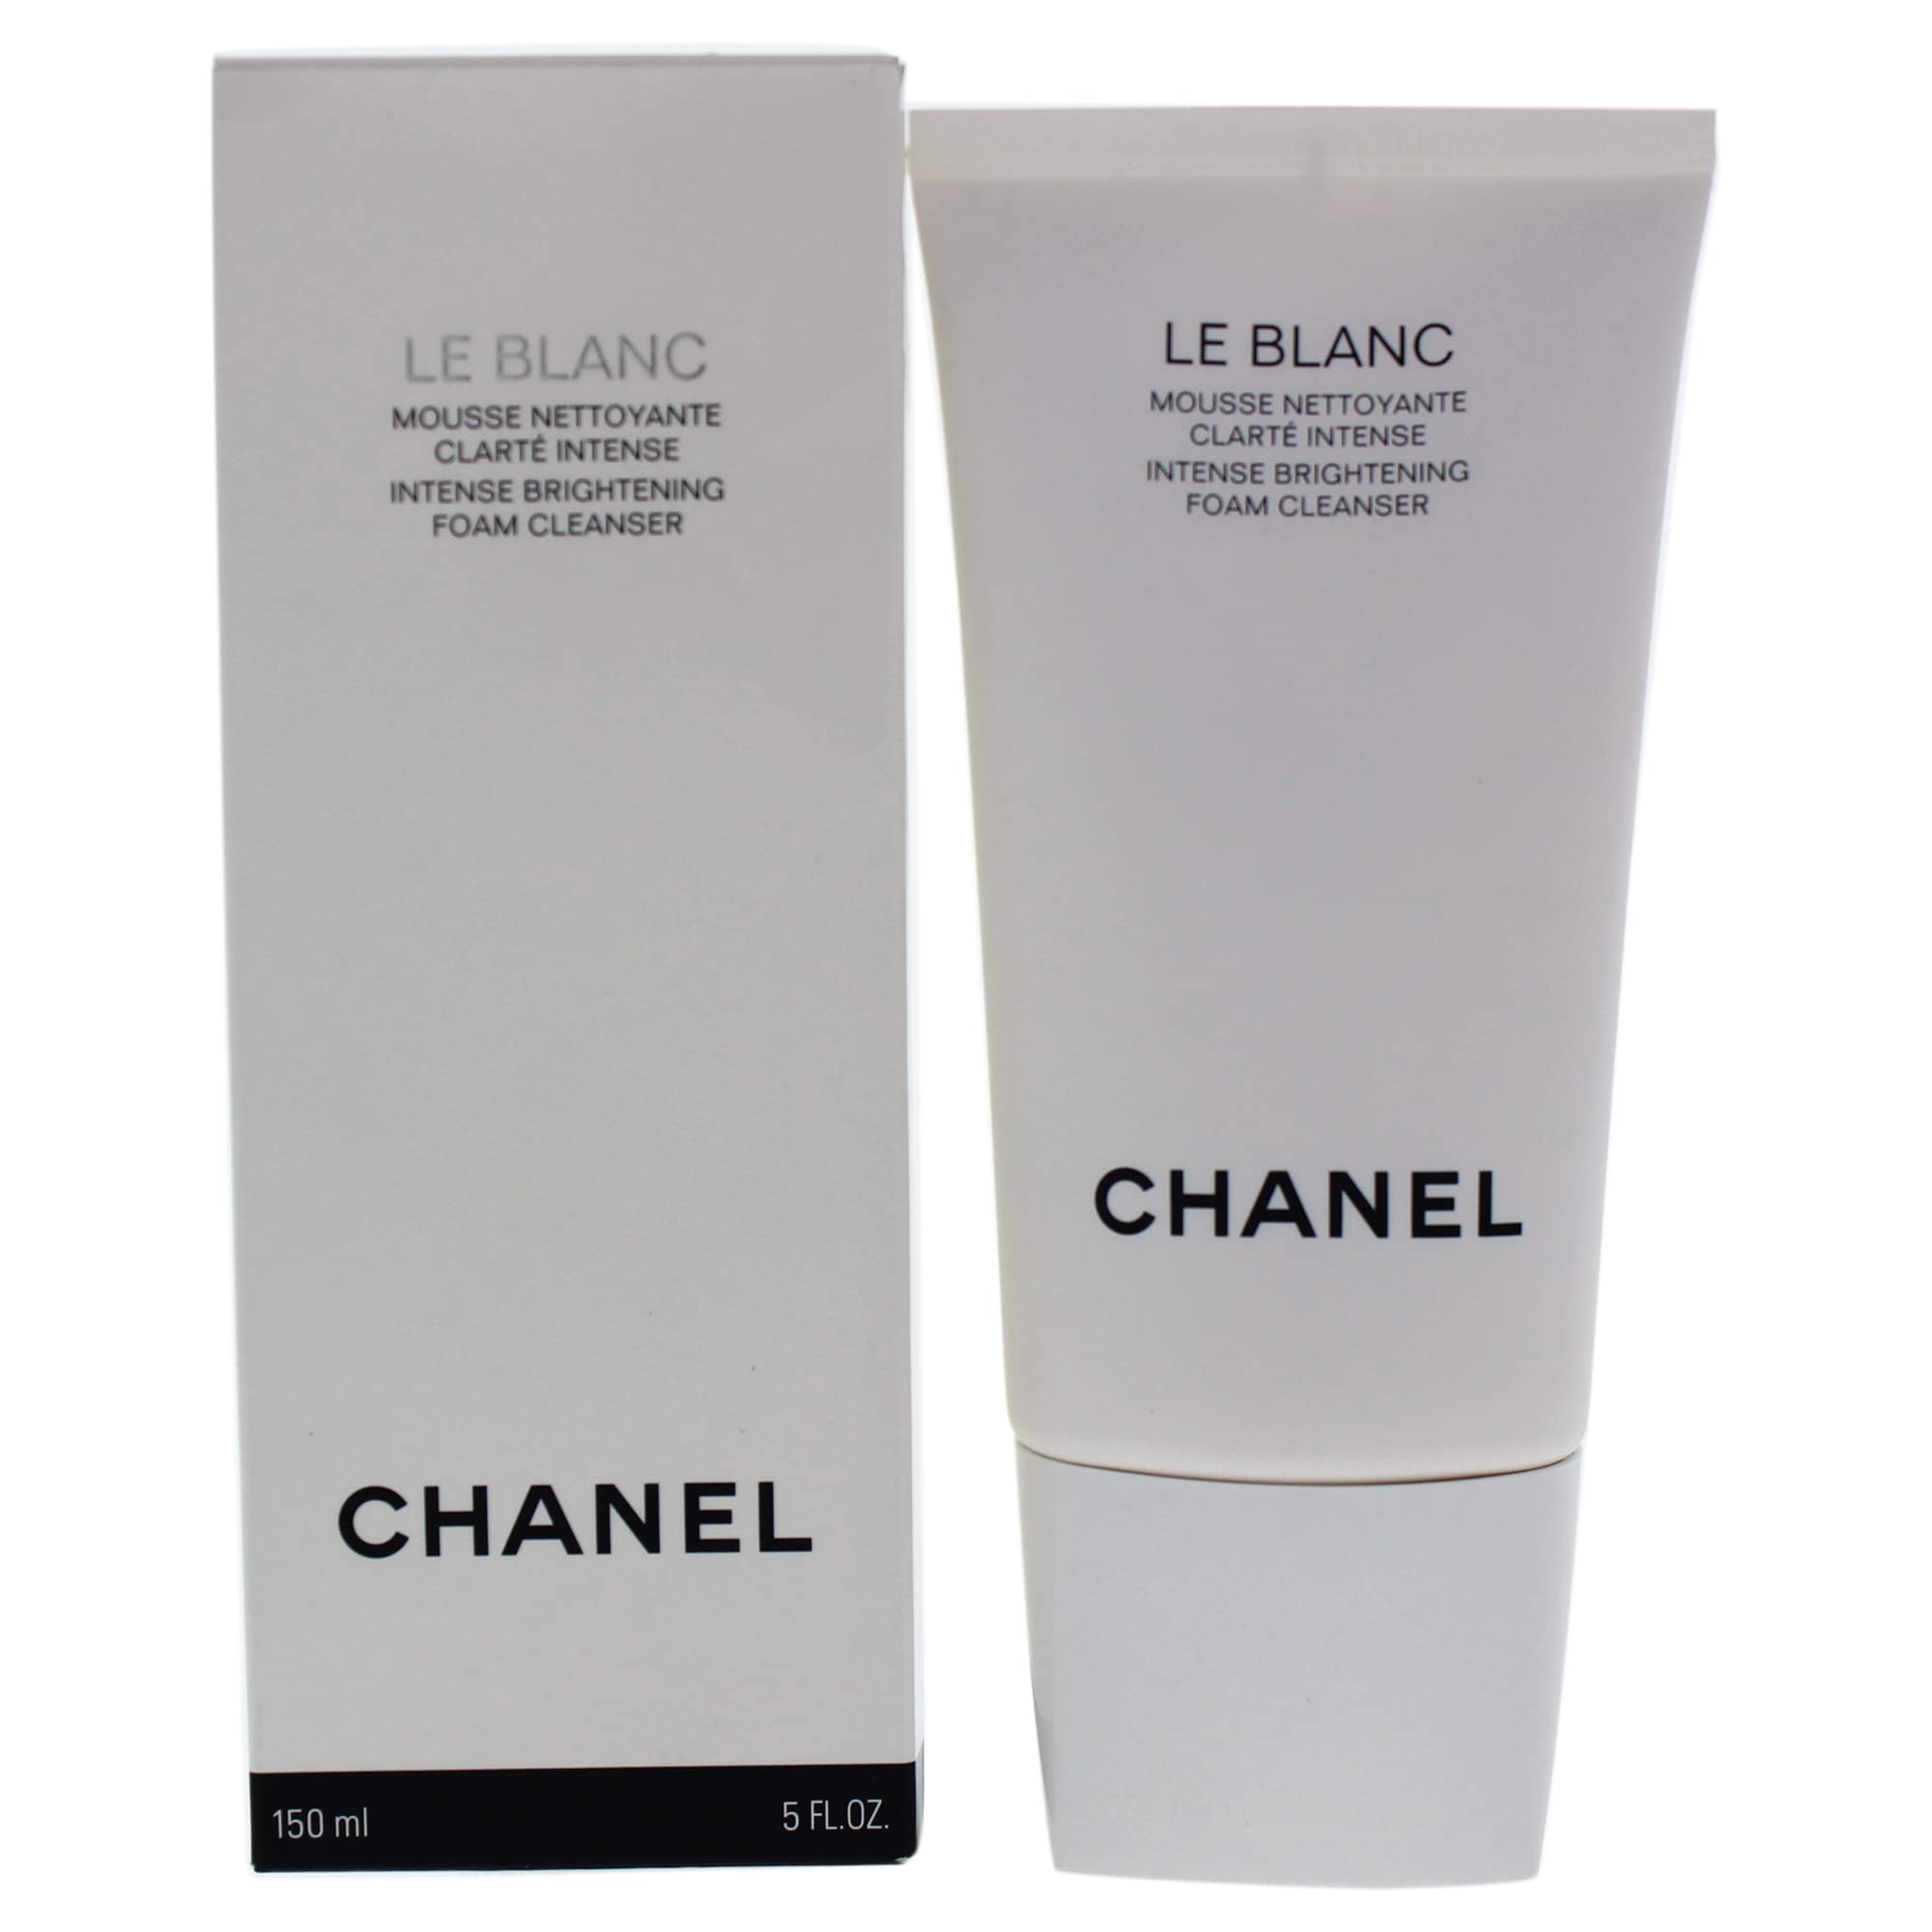 LE BLANC FOAM CLEANSER Cleansers  Makeup Removers  CHANEL